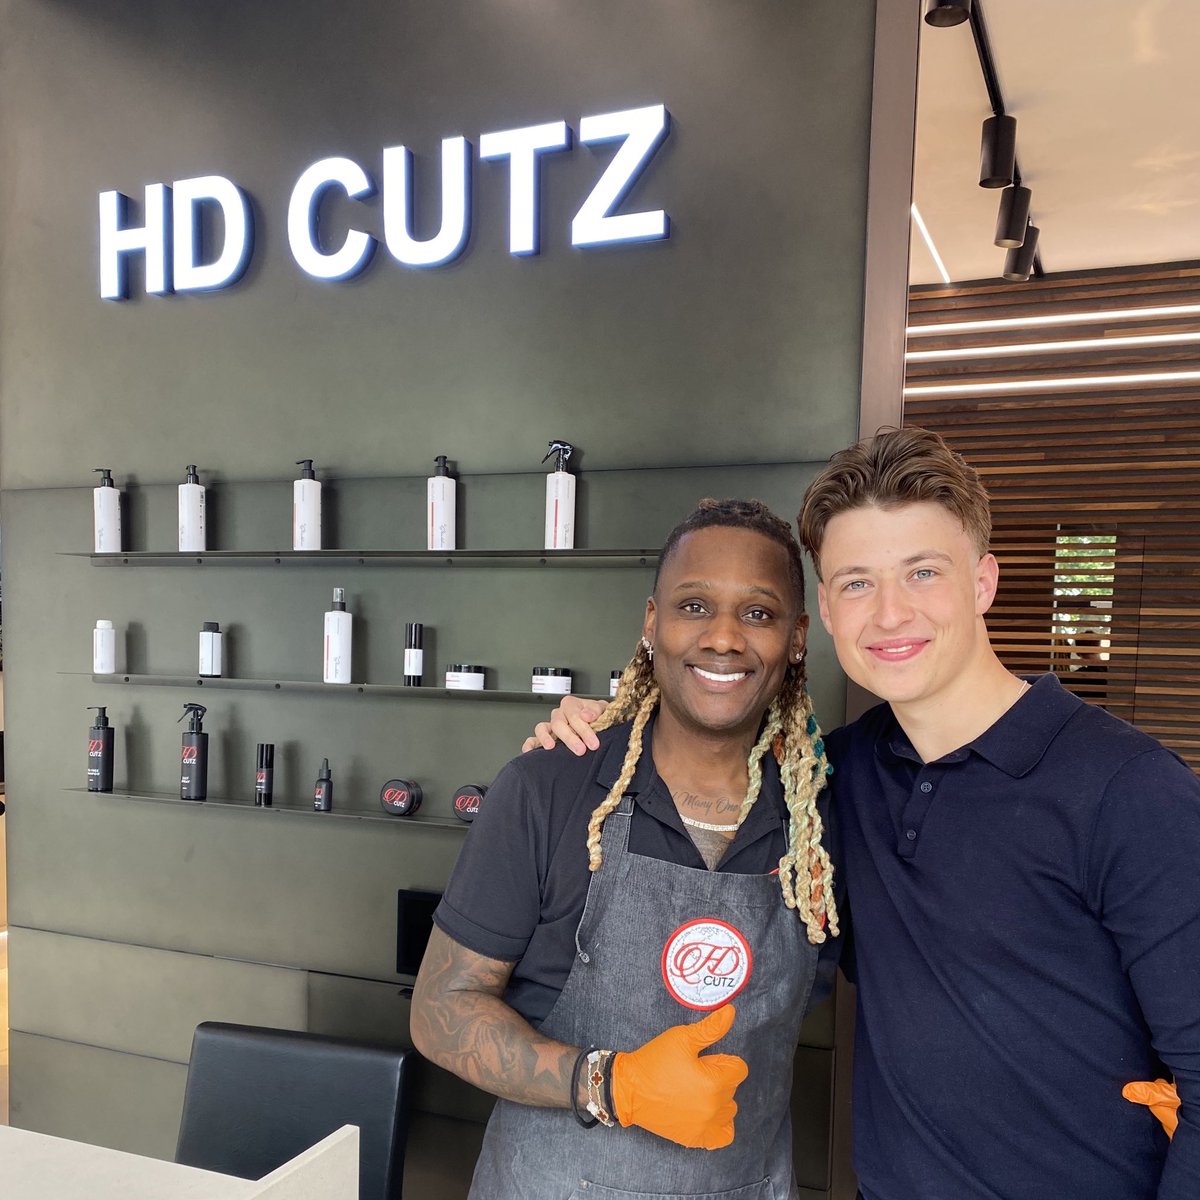 The man behind Bellingham, Vinicius JR and Haaland’s haircuts… So cool to sit down and get a trim from HD Cutz owner Sheldon Edwards. One of life’s good guys! Full video coming soon on @90min_Football ✂️